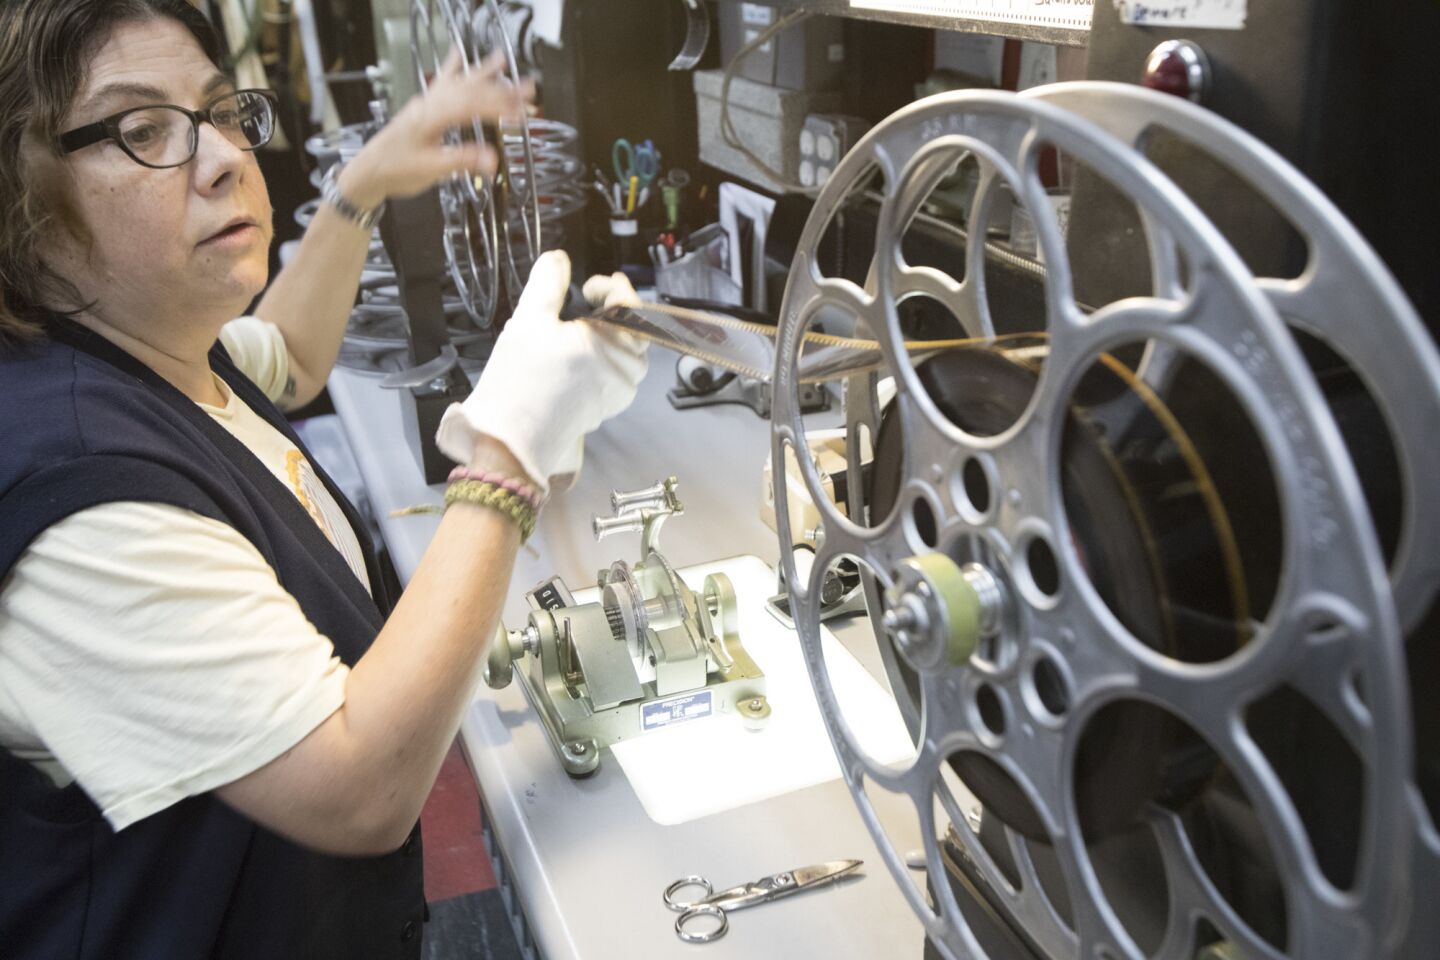 Projectionist Gariana Abeyta inspects a film reel at the New Beverly Cinema.